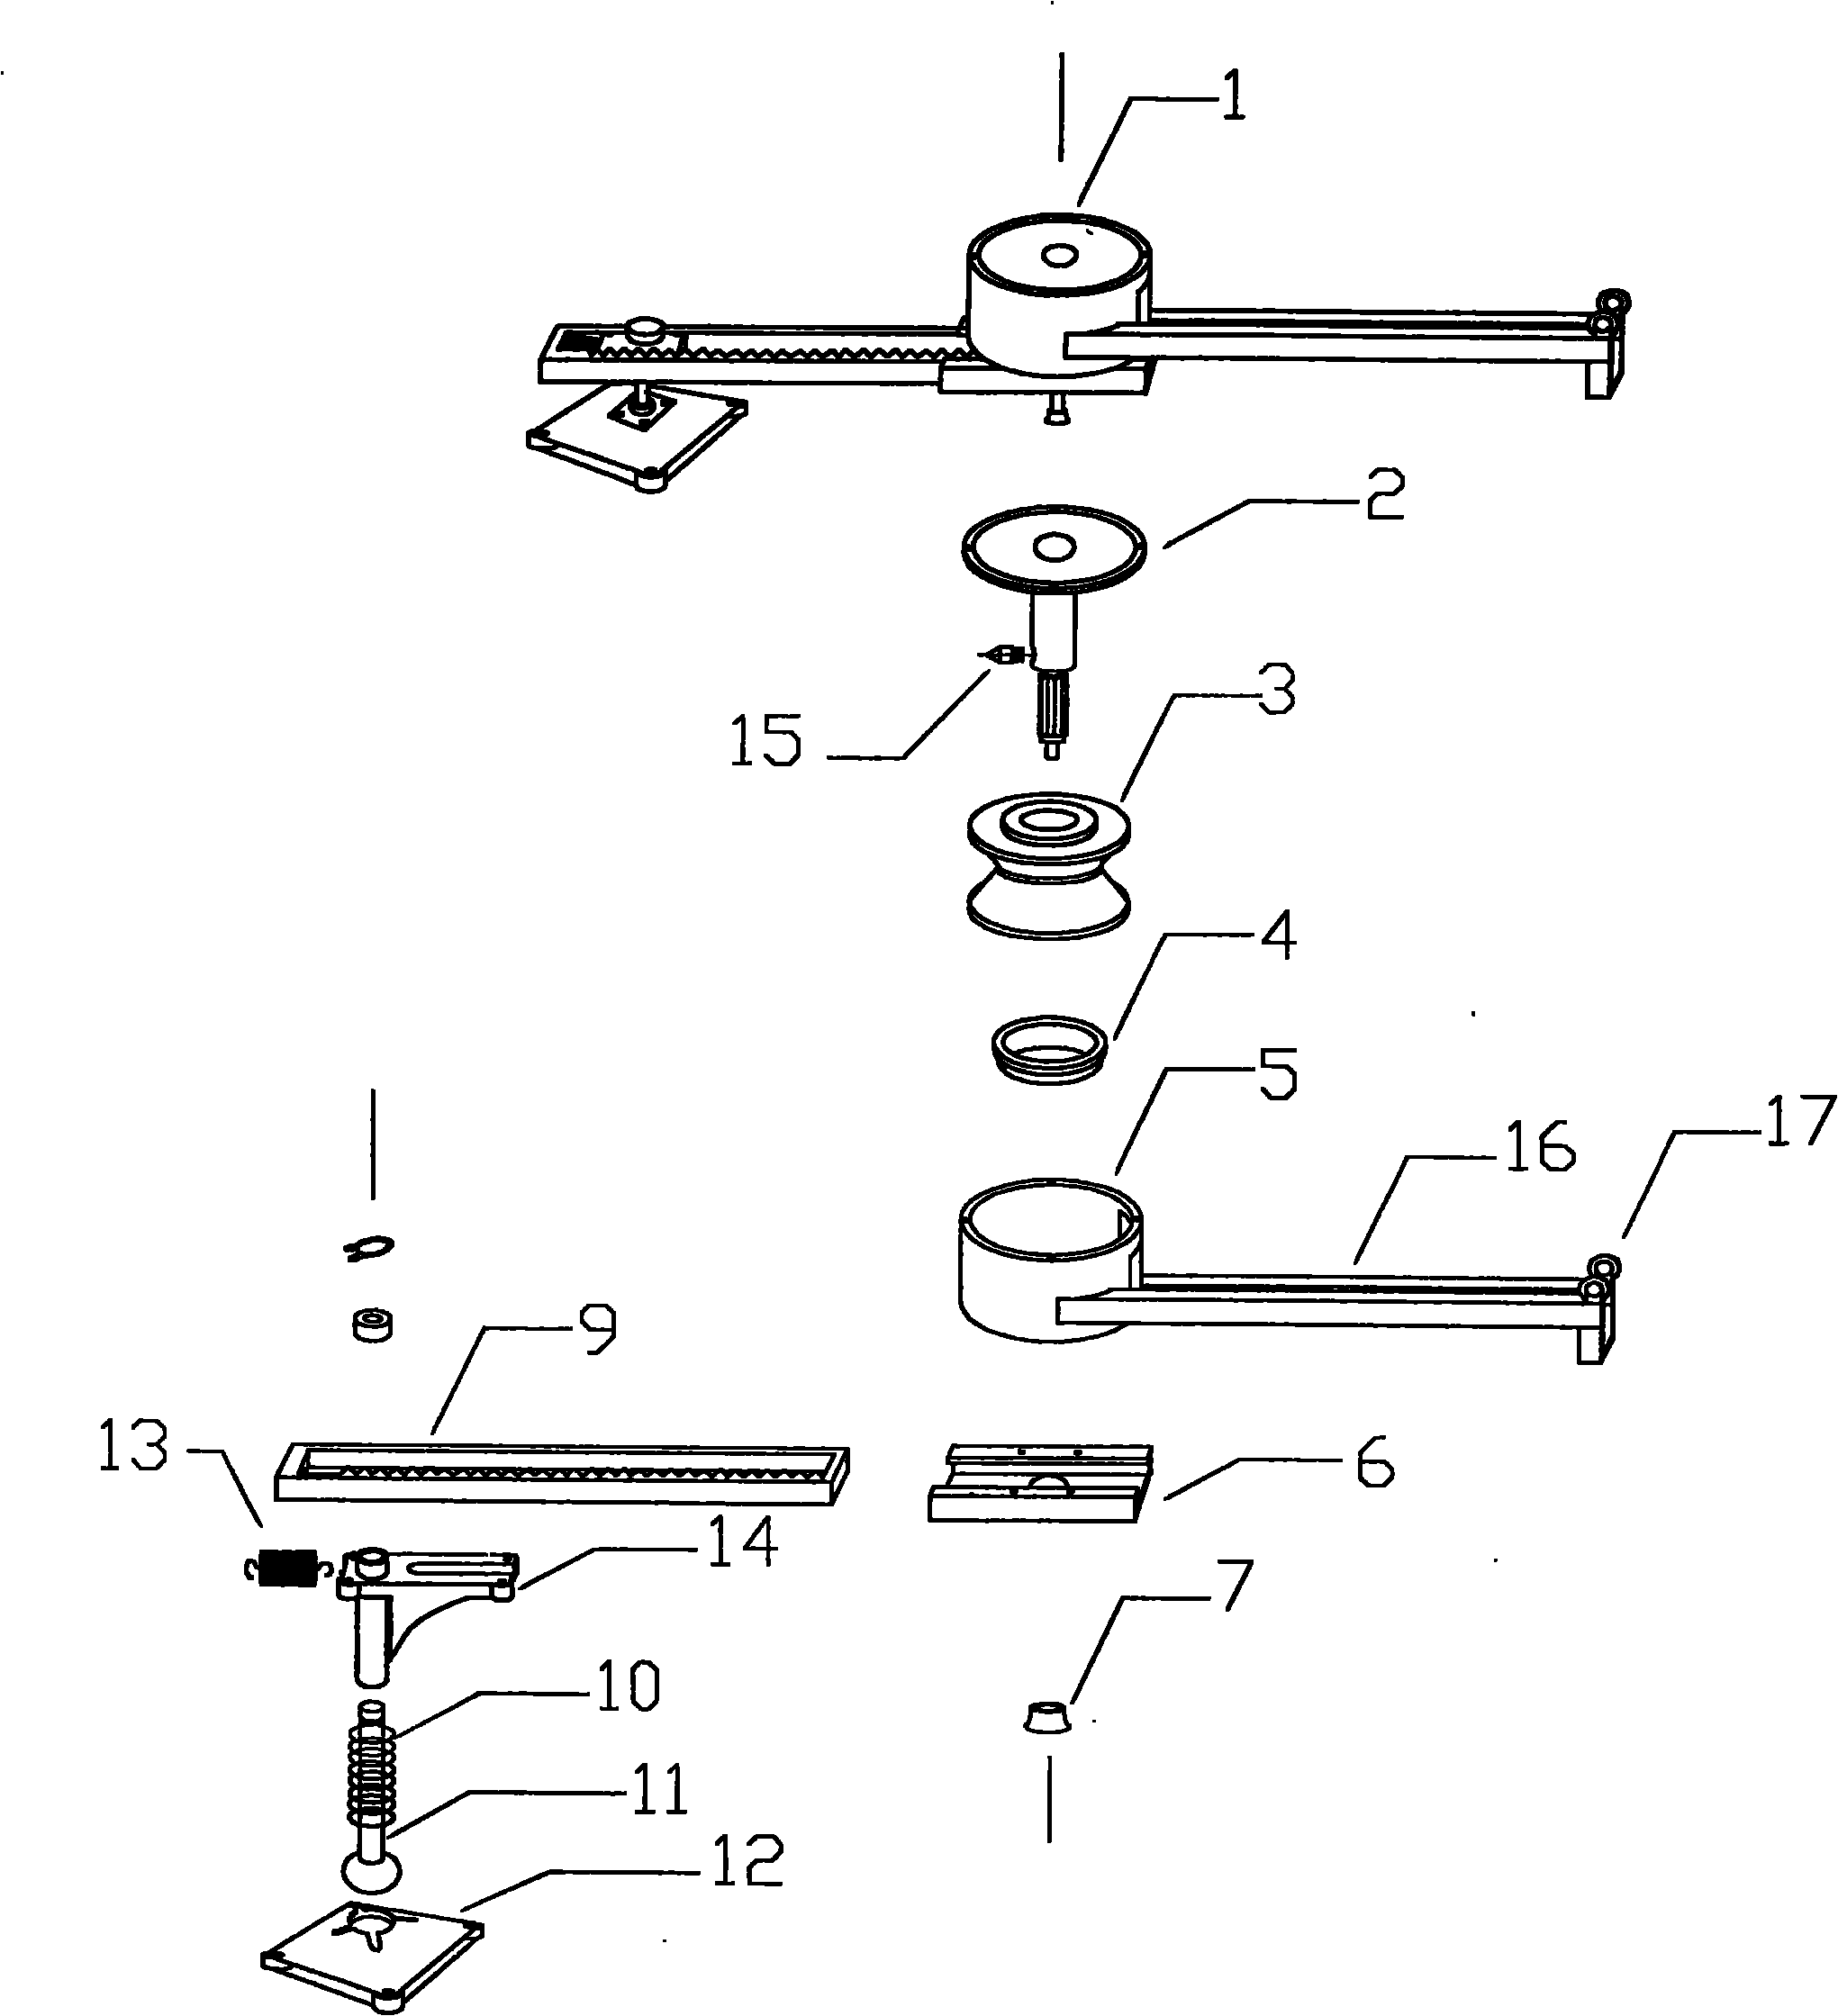 Window wiper capable of multi-point positioning and reciprocated rotating